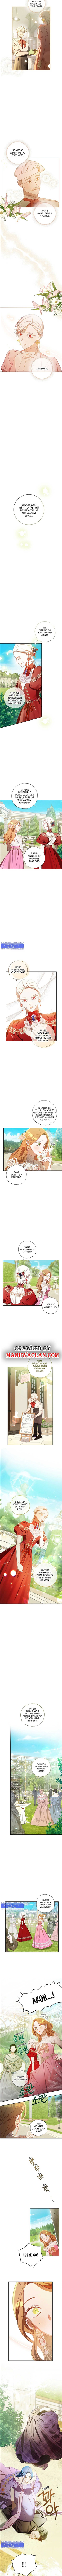 I am Afraid I have Failed to Divorce Chapter 62 page 3